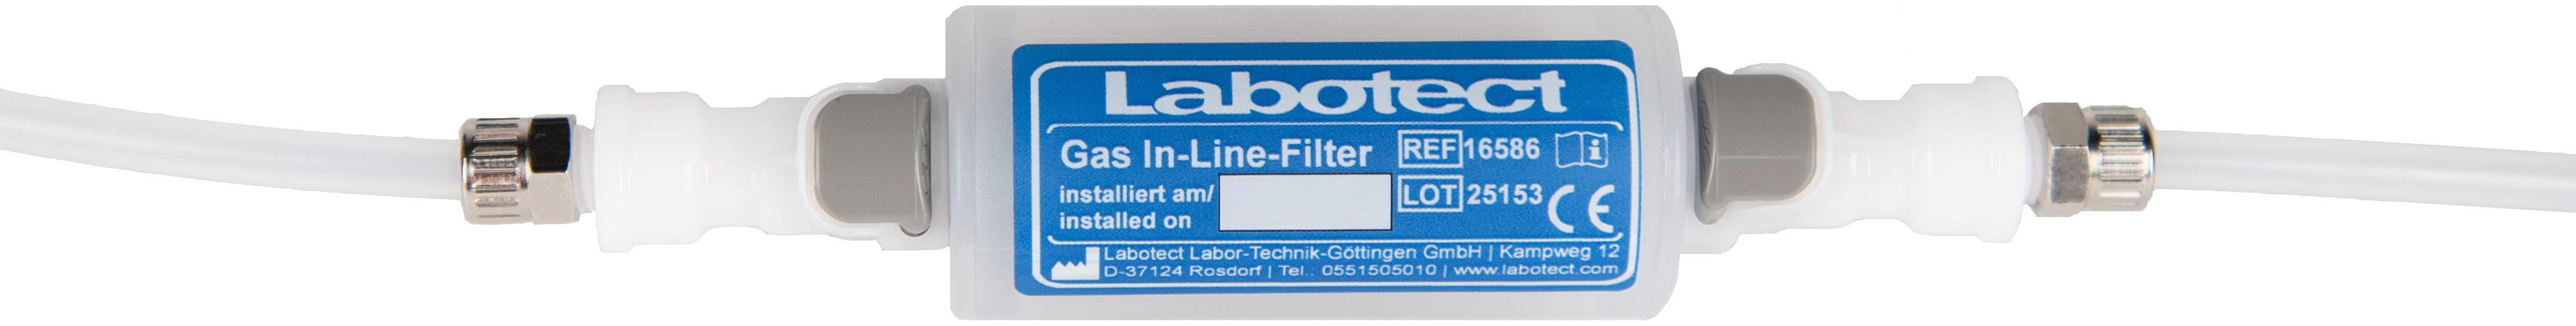 Gas In-Line-Filter